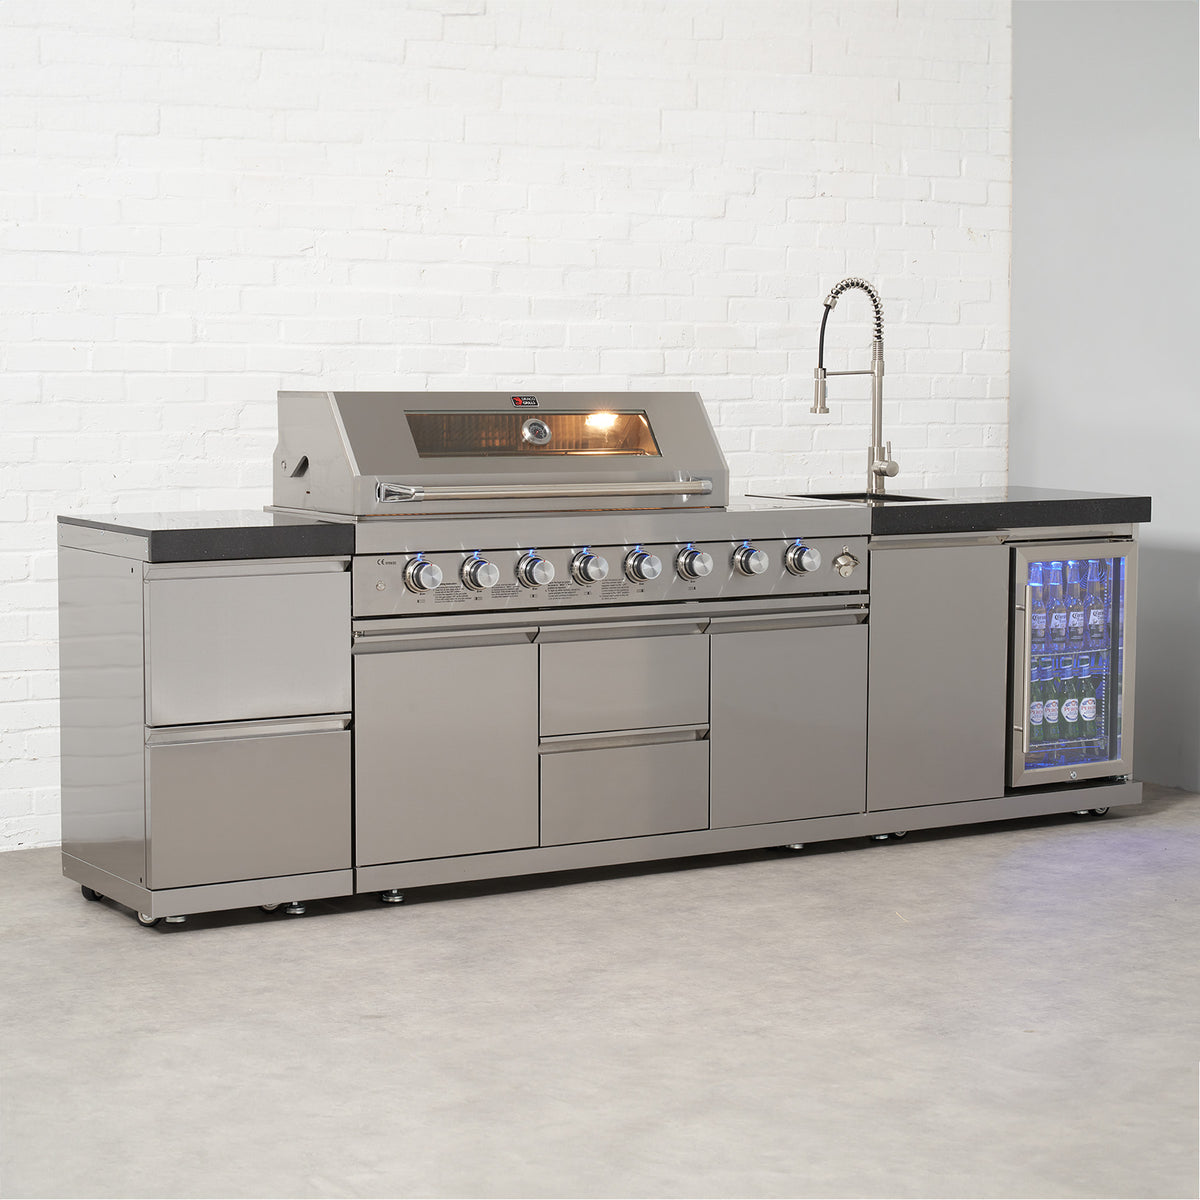 Draco Grills 6 Burner BBQ Modular Outdoor Kitchen with Double Drawers, Single Fridge and Sink Unit